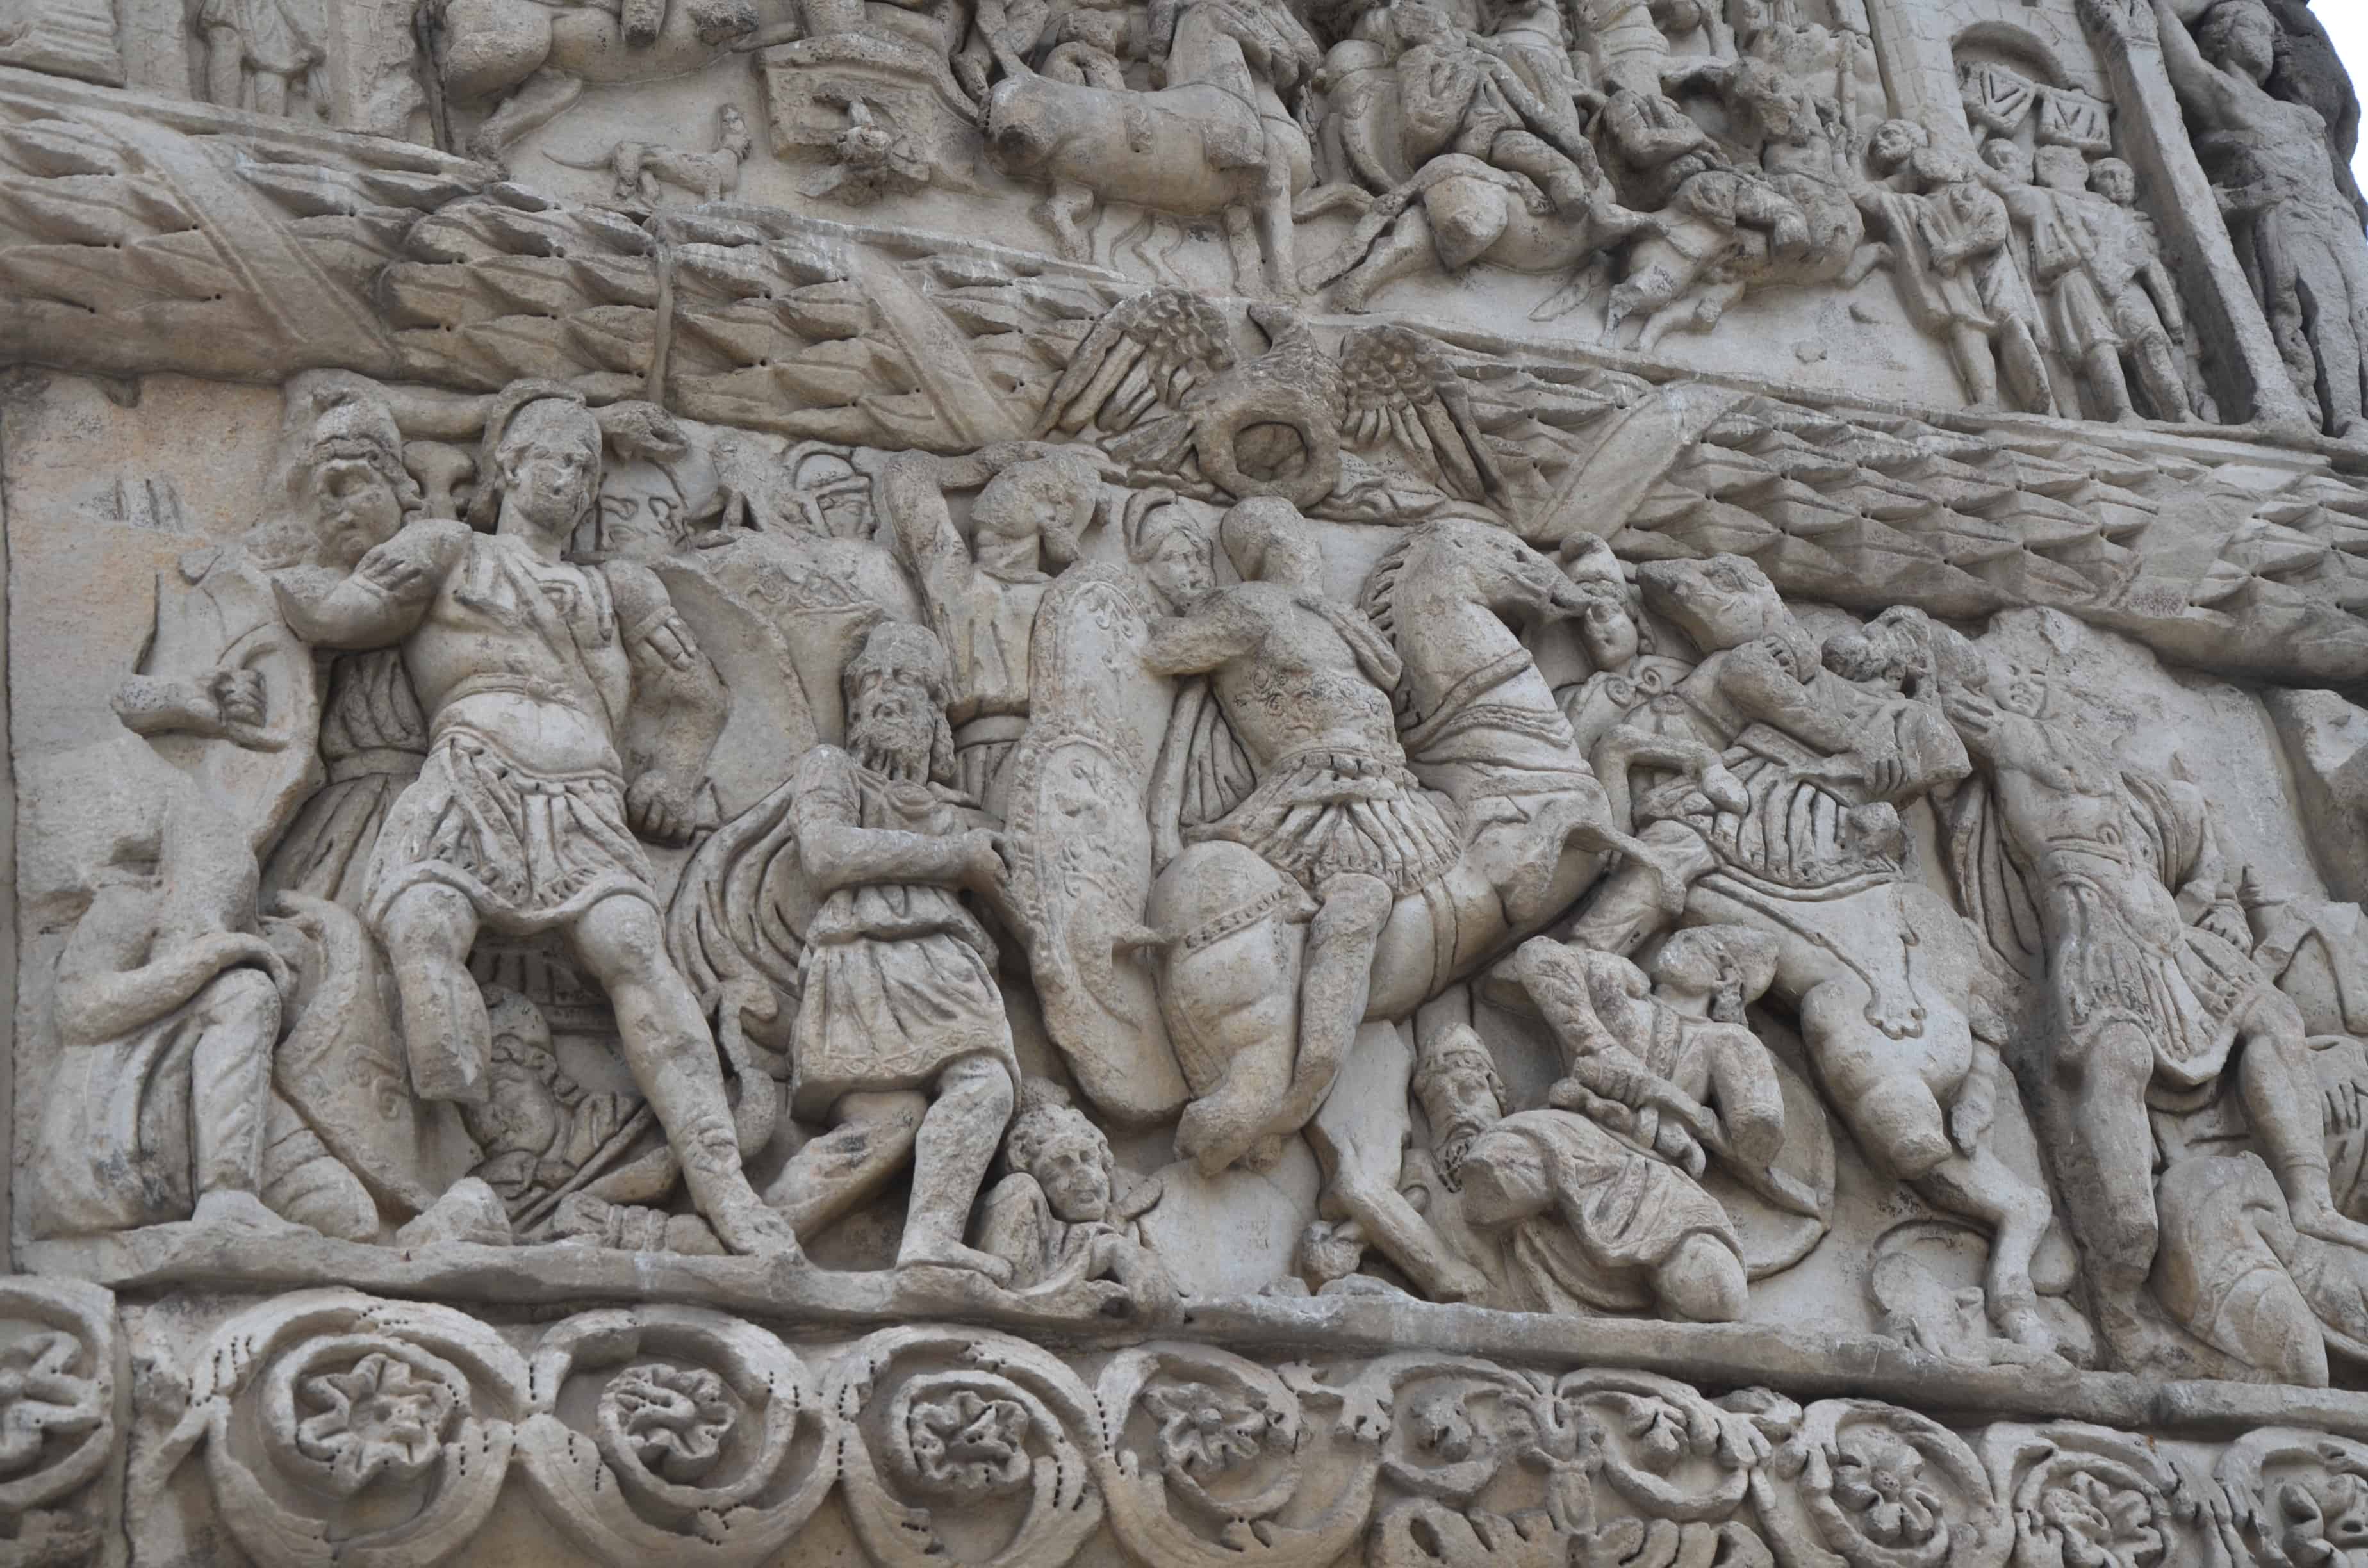 Galerius attacks Shah Narseh on the Arch of Galerius in Thessaloniki, Greece